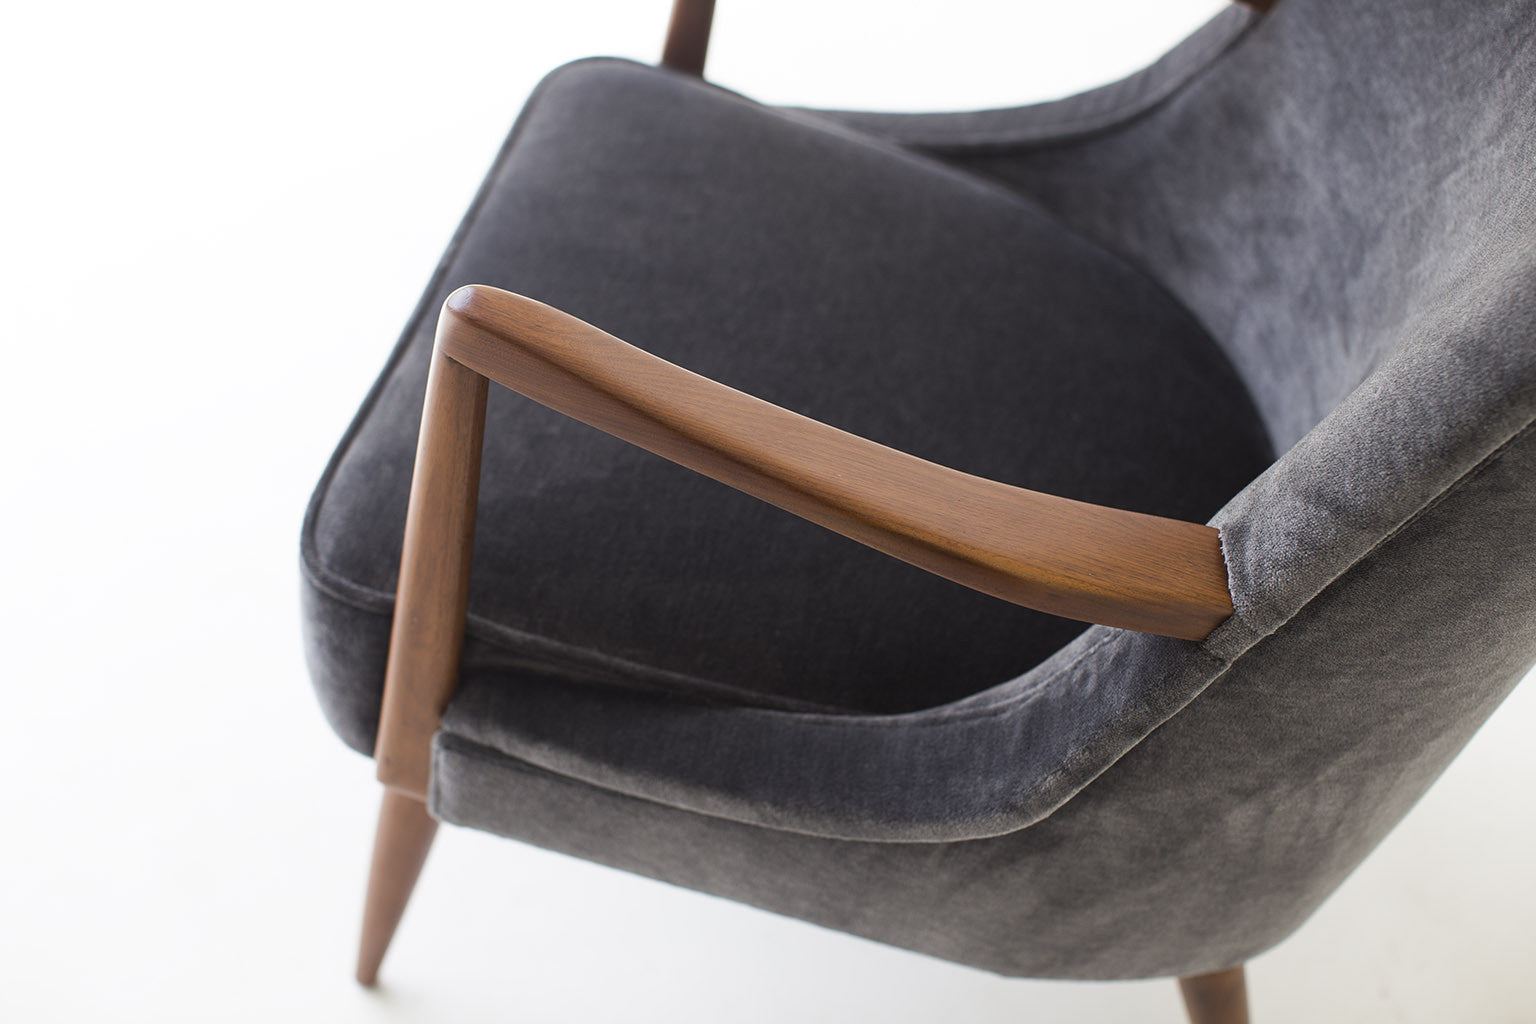 Erno Fabry Lounge Chair - 01141609